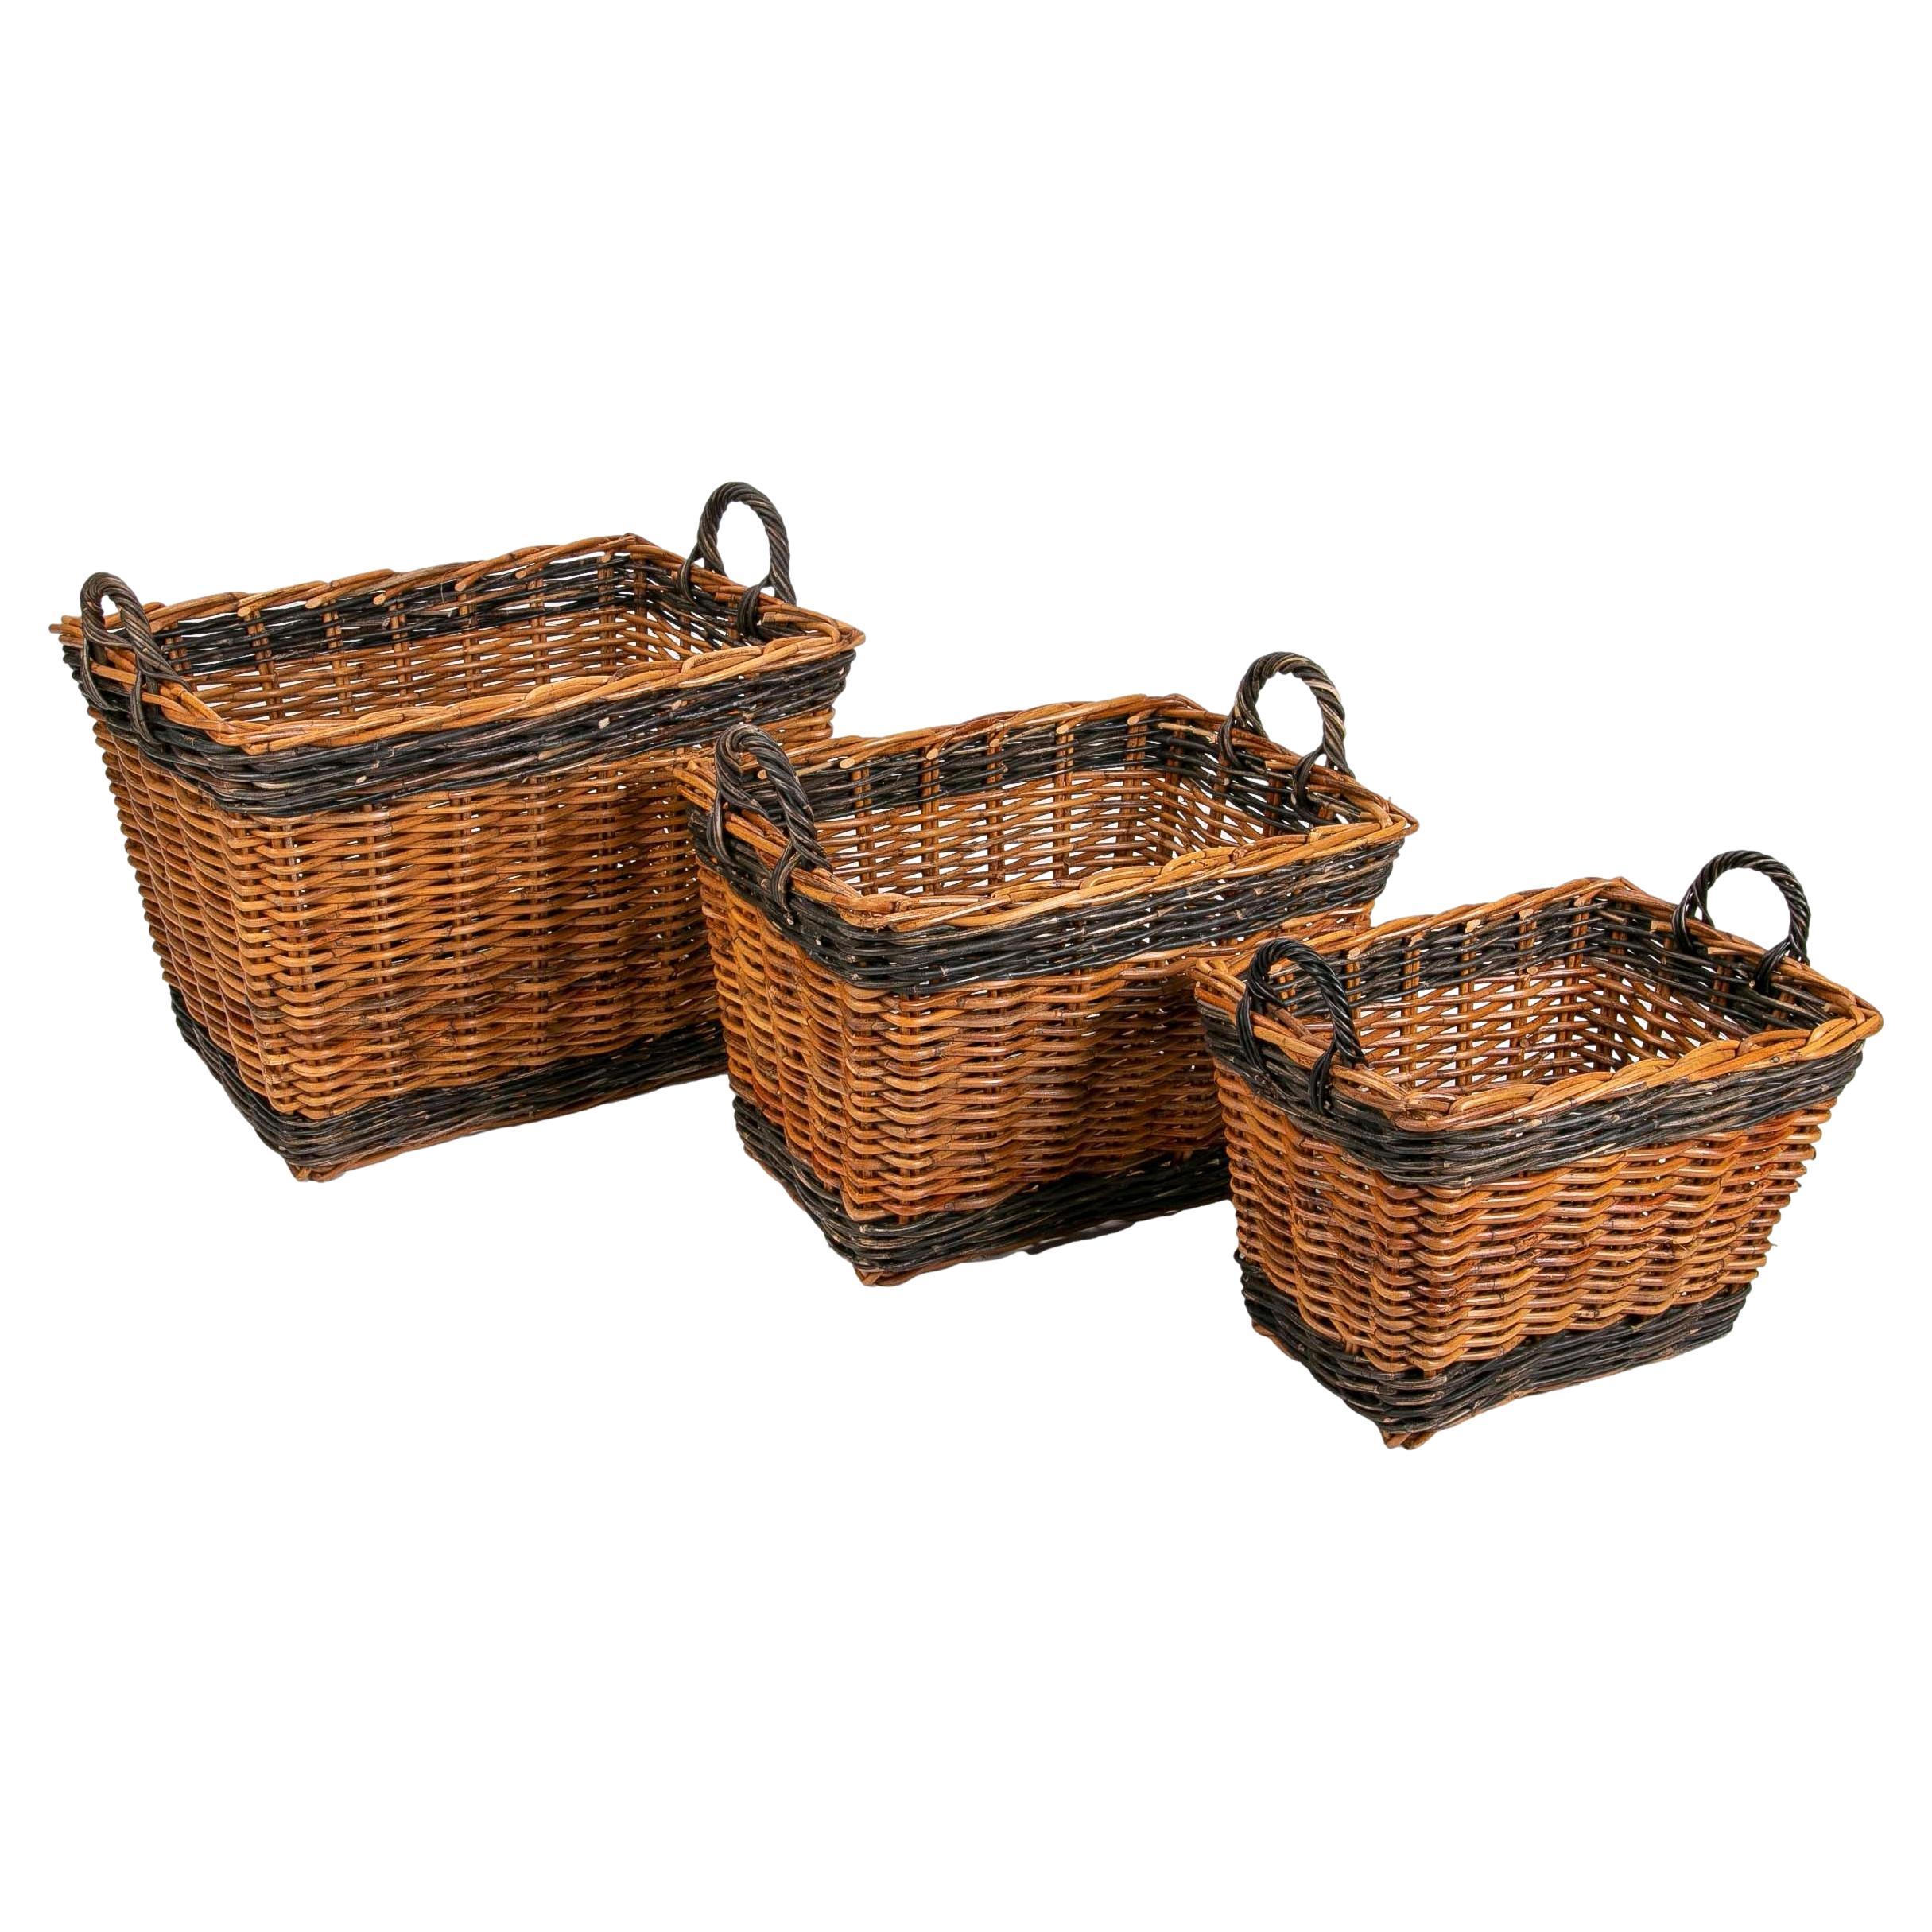 Set Consisting of Three Decorative Wicker Baskets of Different Sizes